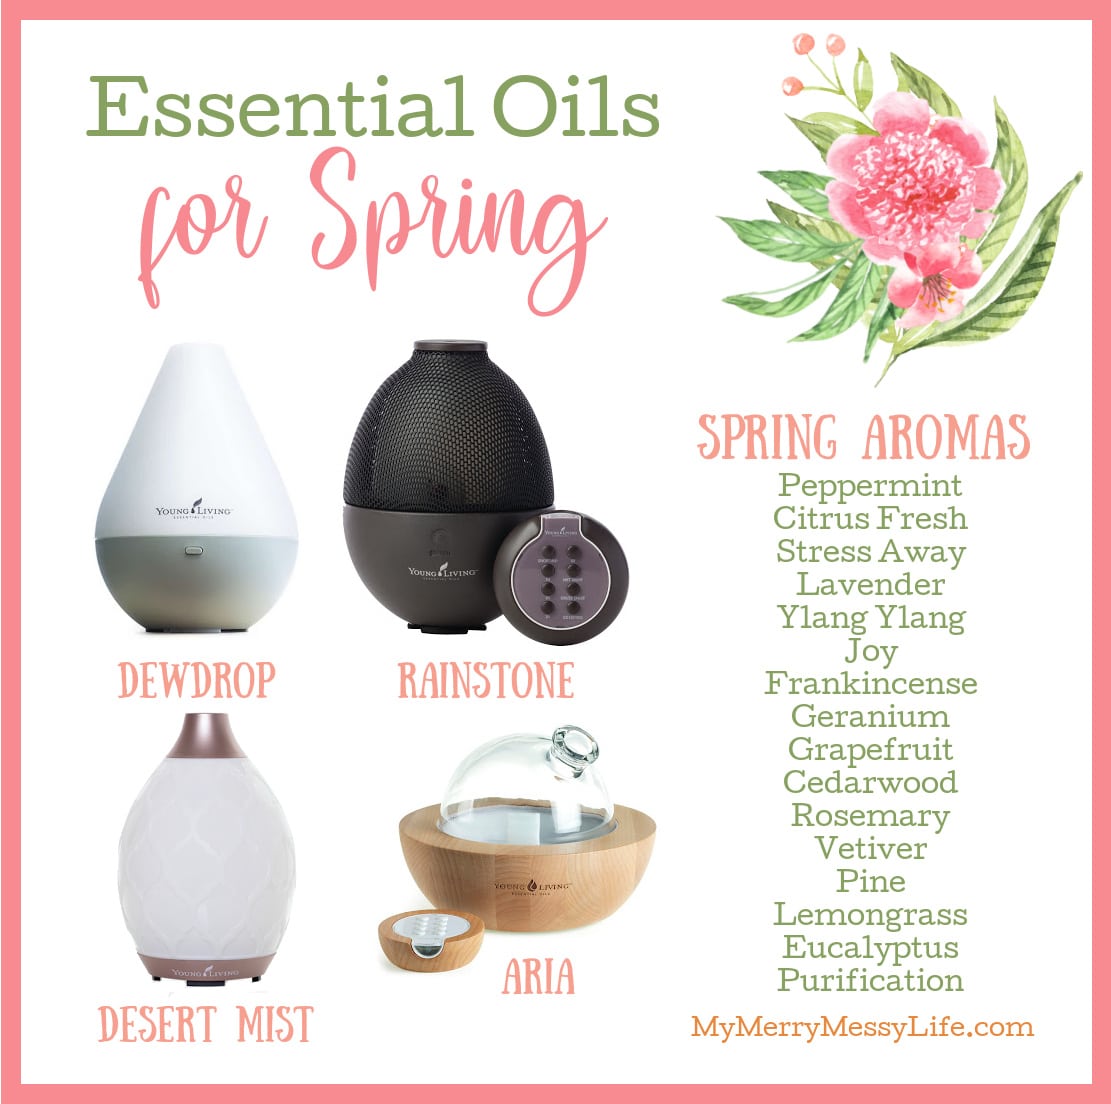 Essential Oils and Diffusers for Spring Diffuser Blend Recipes